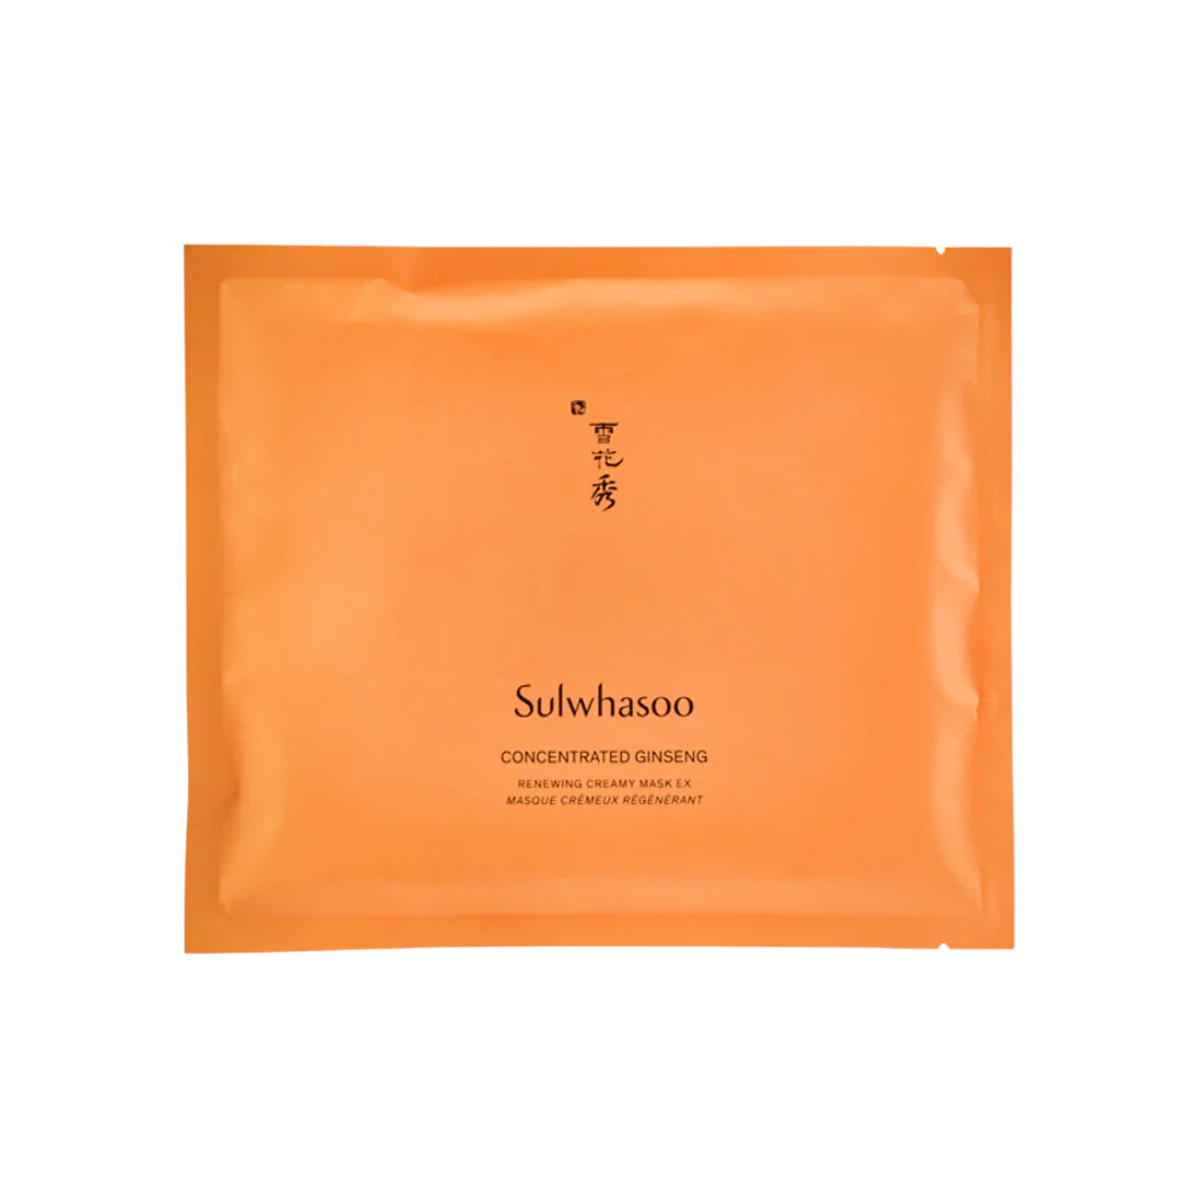 Sulwhasoo Concentrated Ginseng Renewing Creamy Mask EX (1 piece)